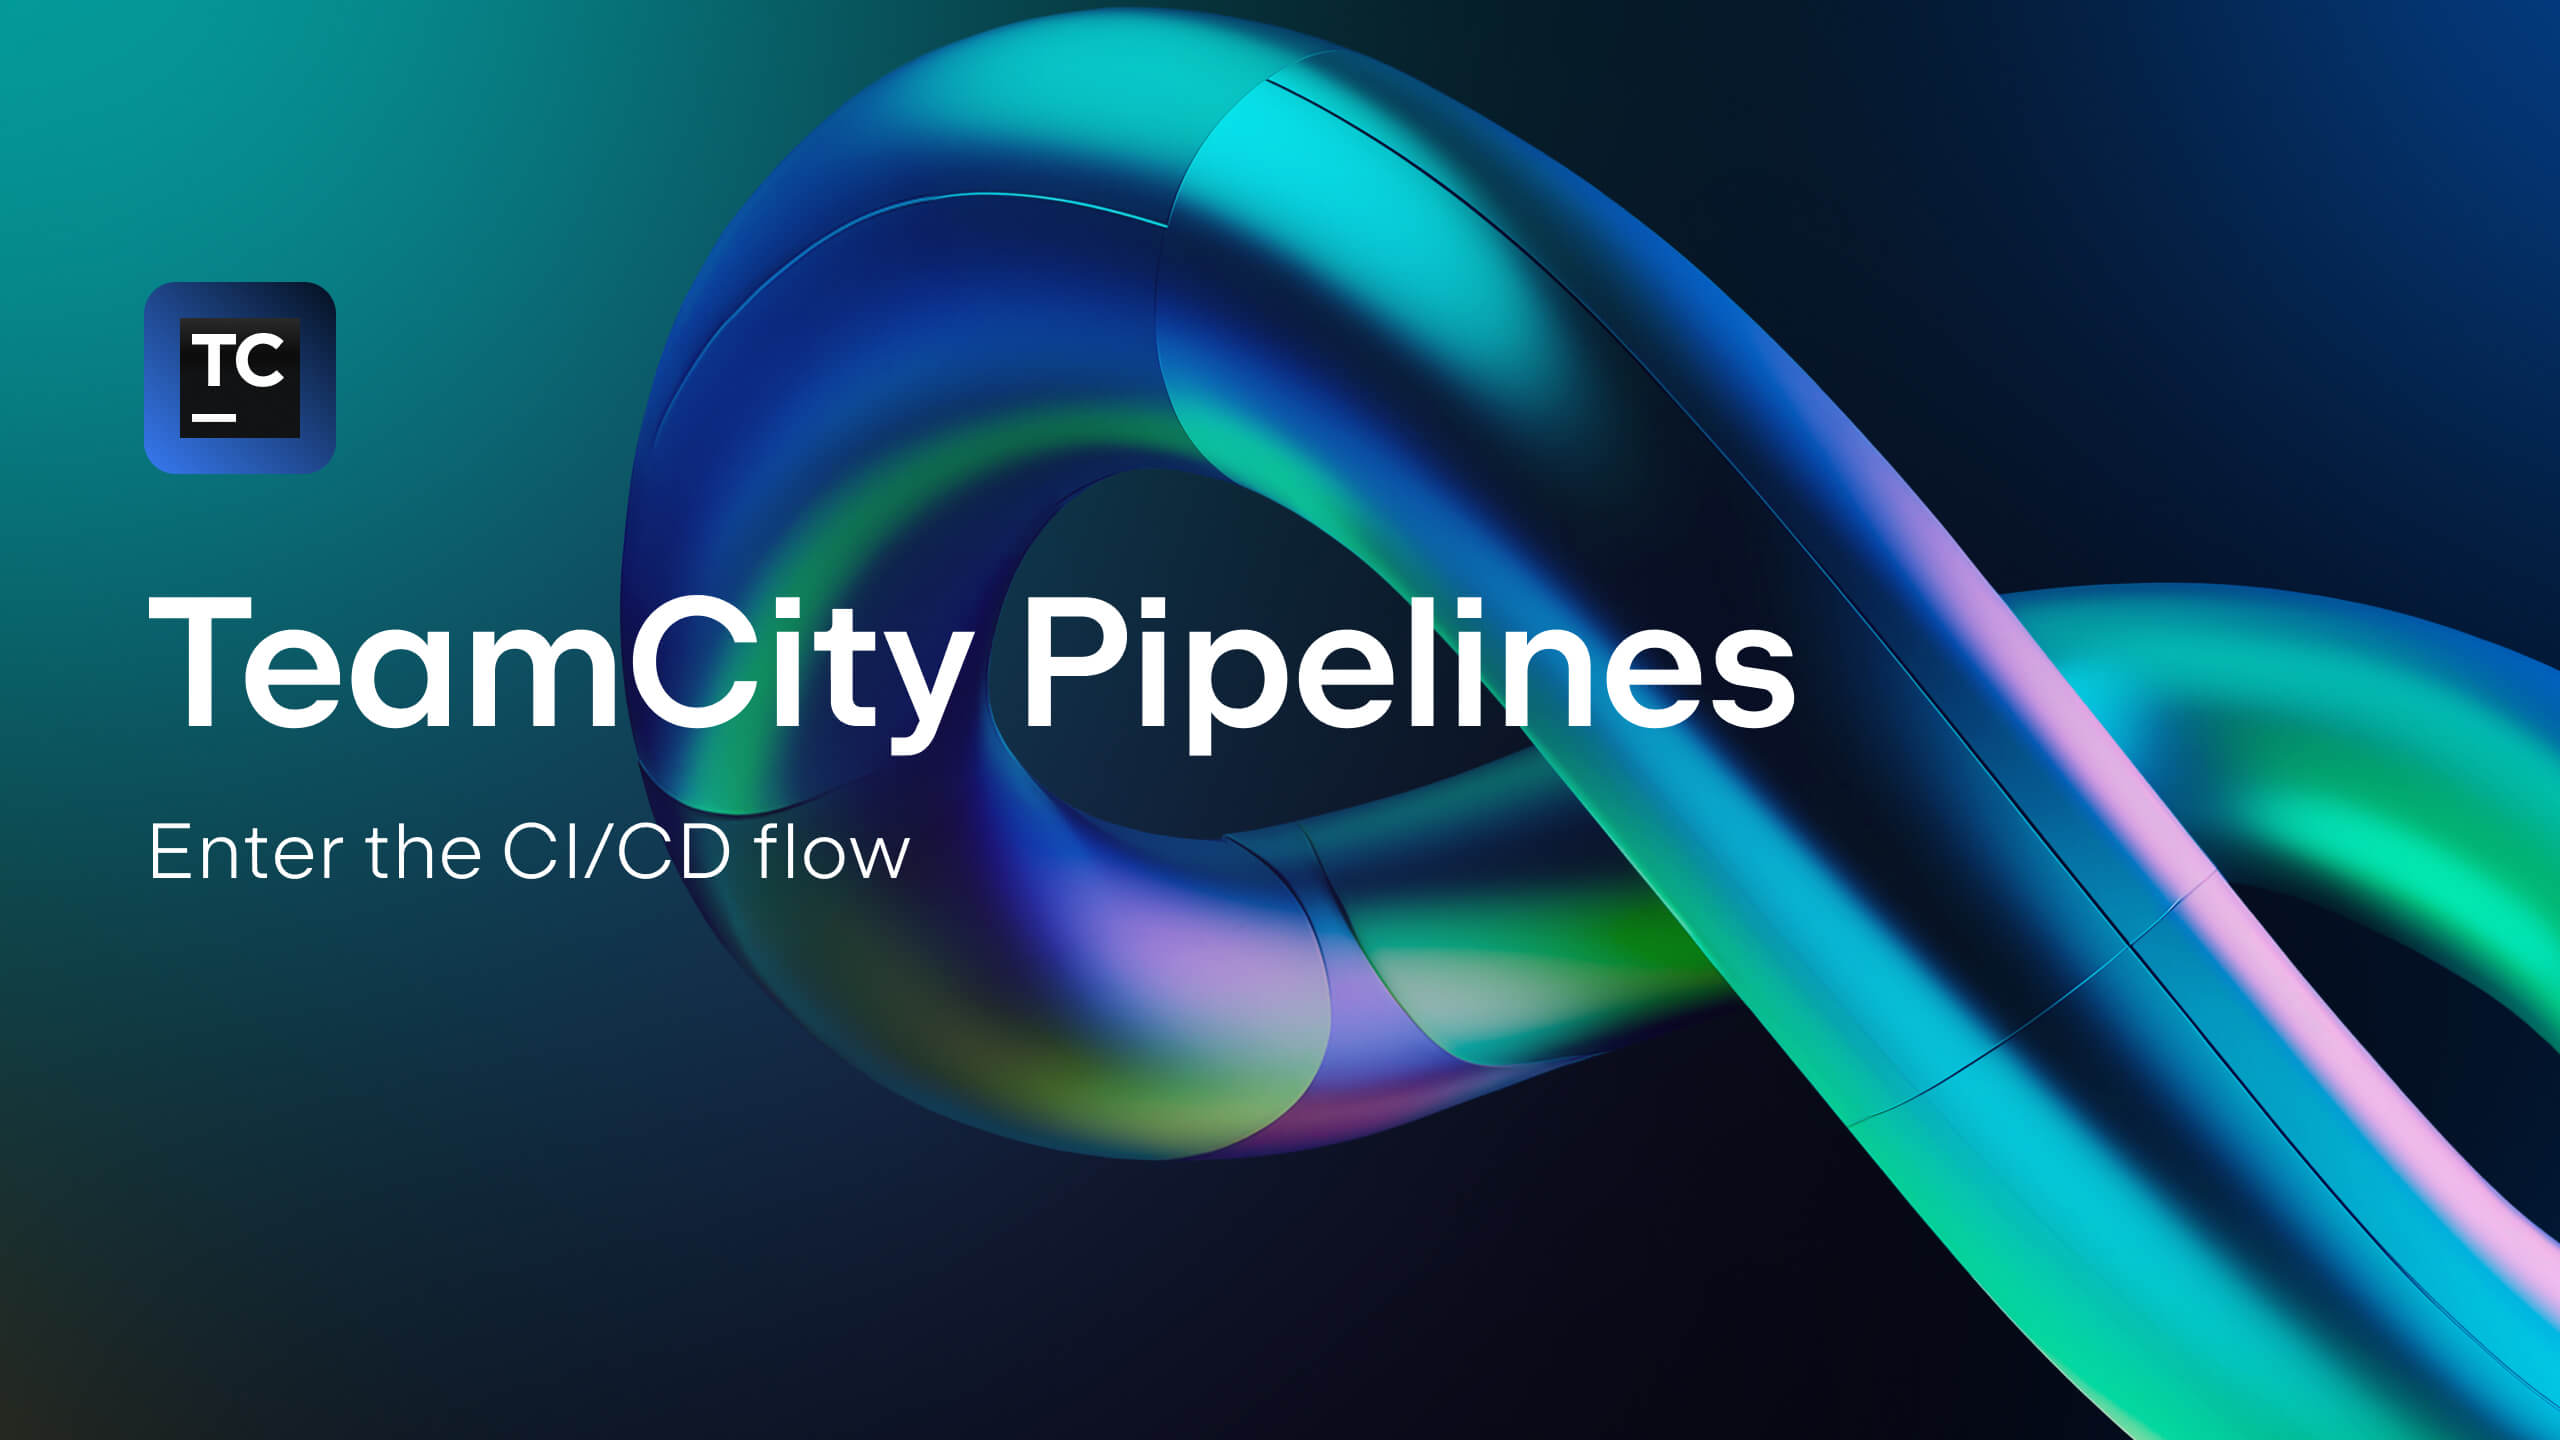 Make CI/CD Part of Your Development Flow With TeamCity Pipelines